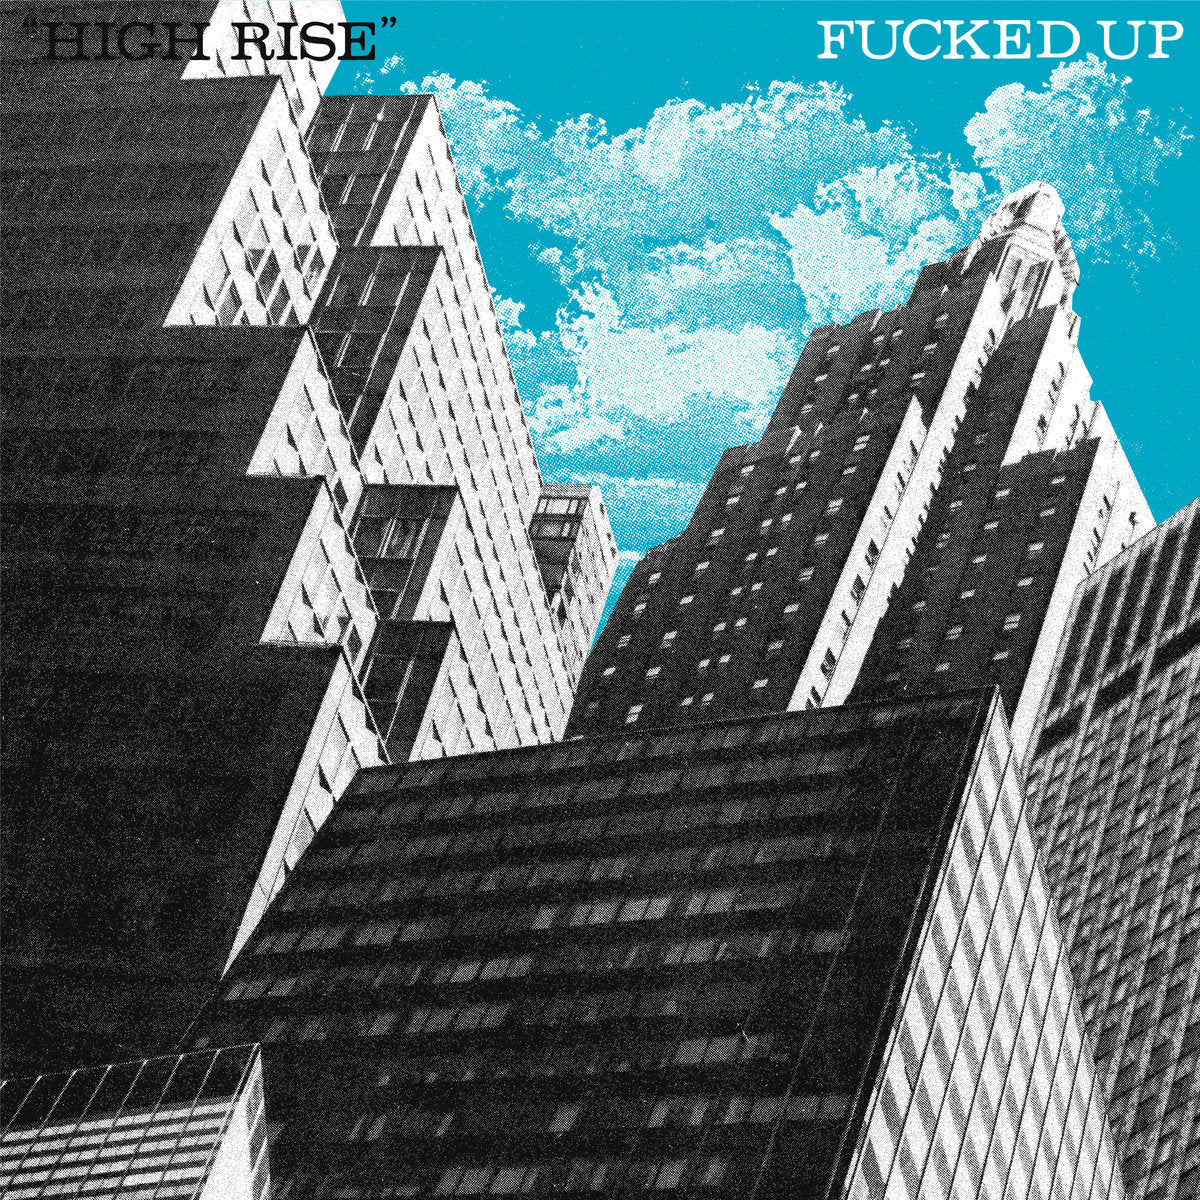 Fucked Up "High Rise b/w Tower On Time" 7" Vinyl